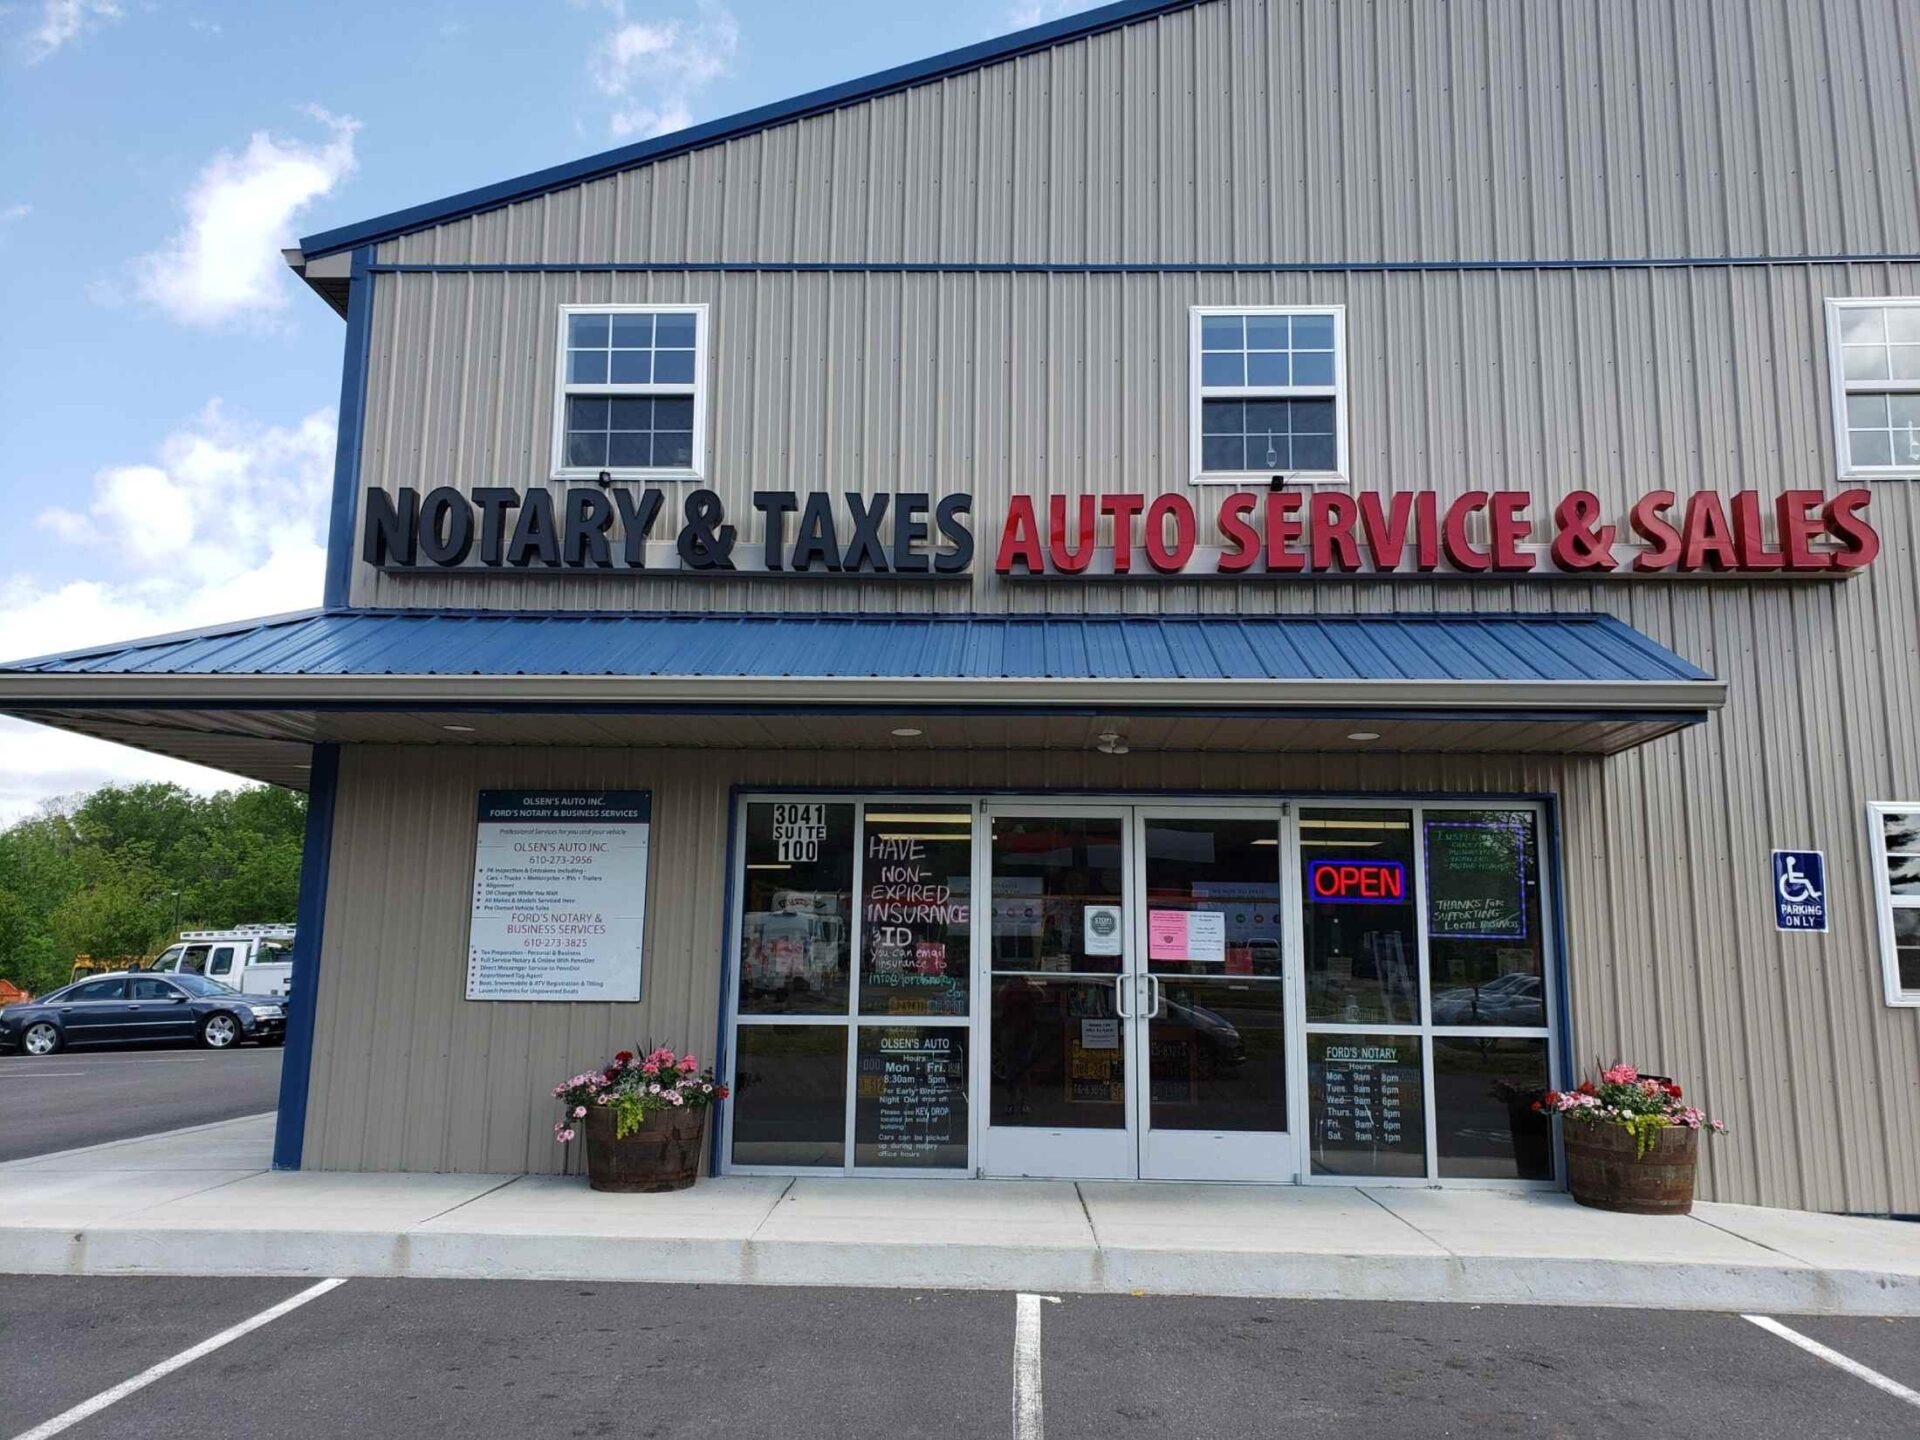 Fords Notary